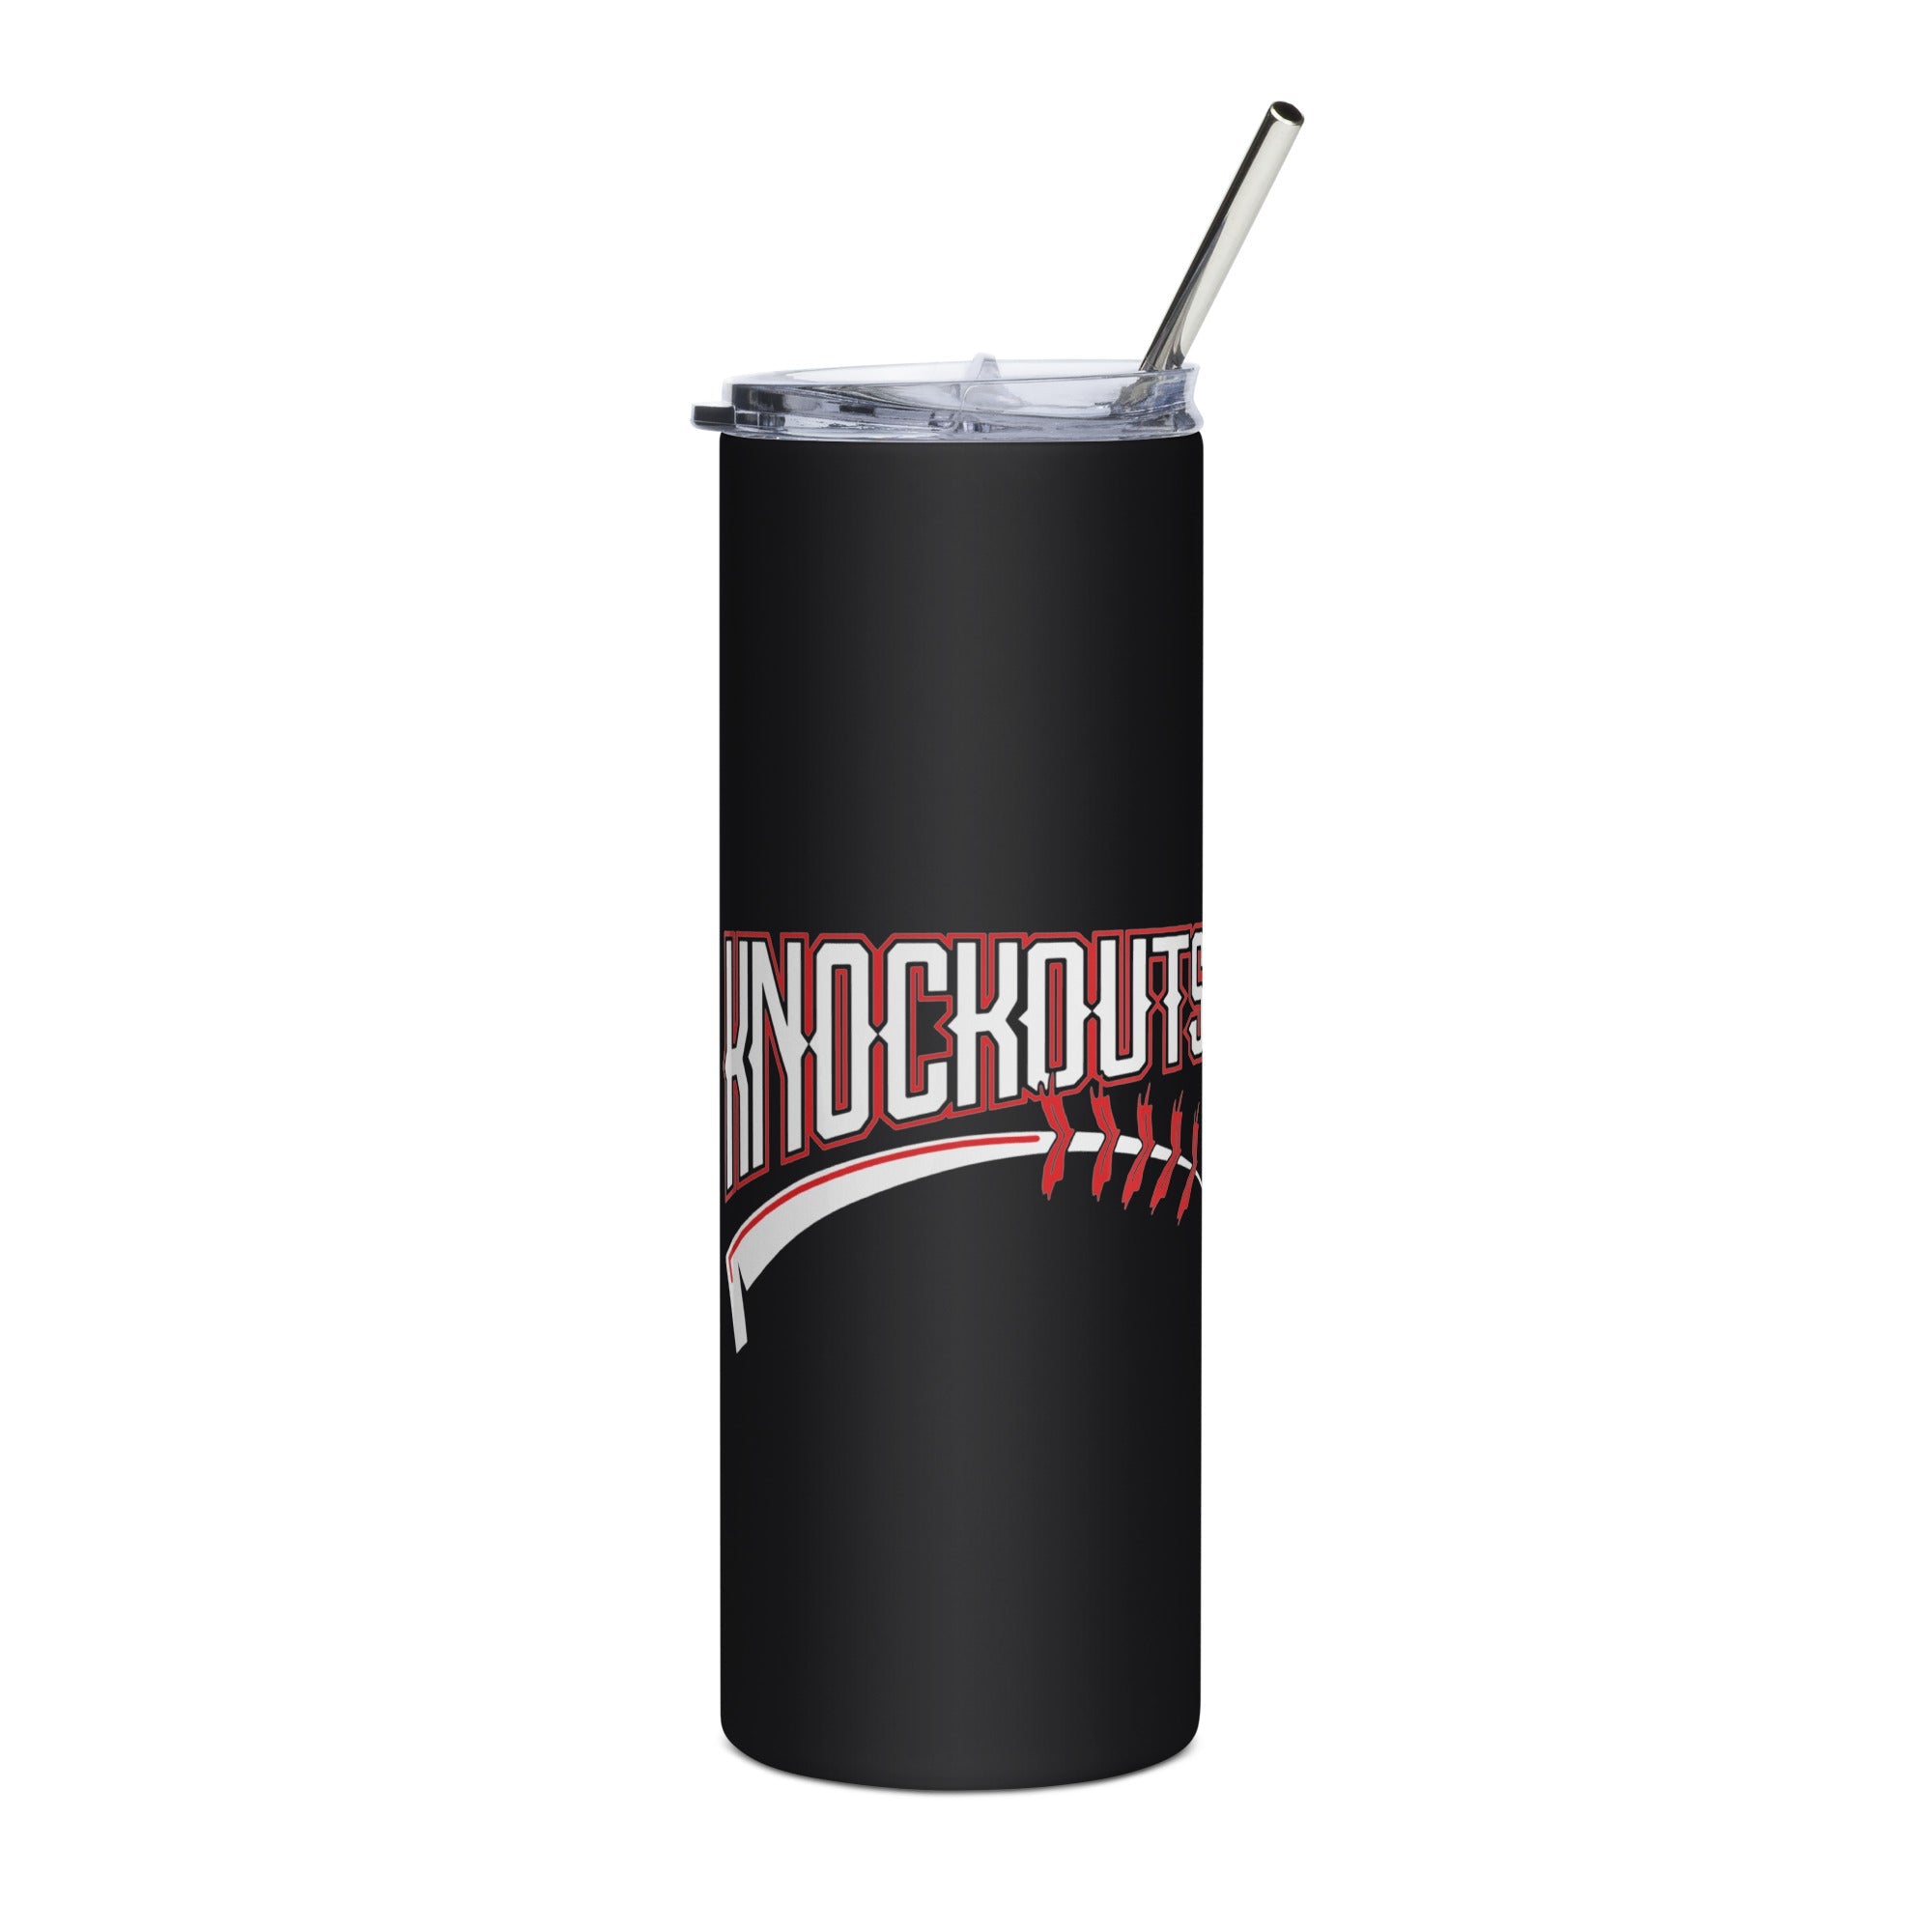 Knockouts Stainless steel tumbler